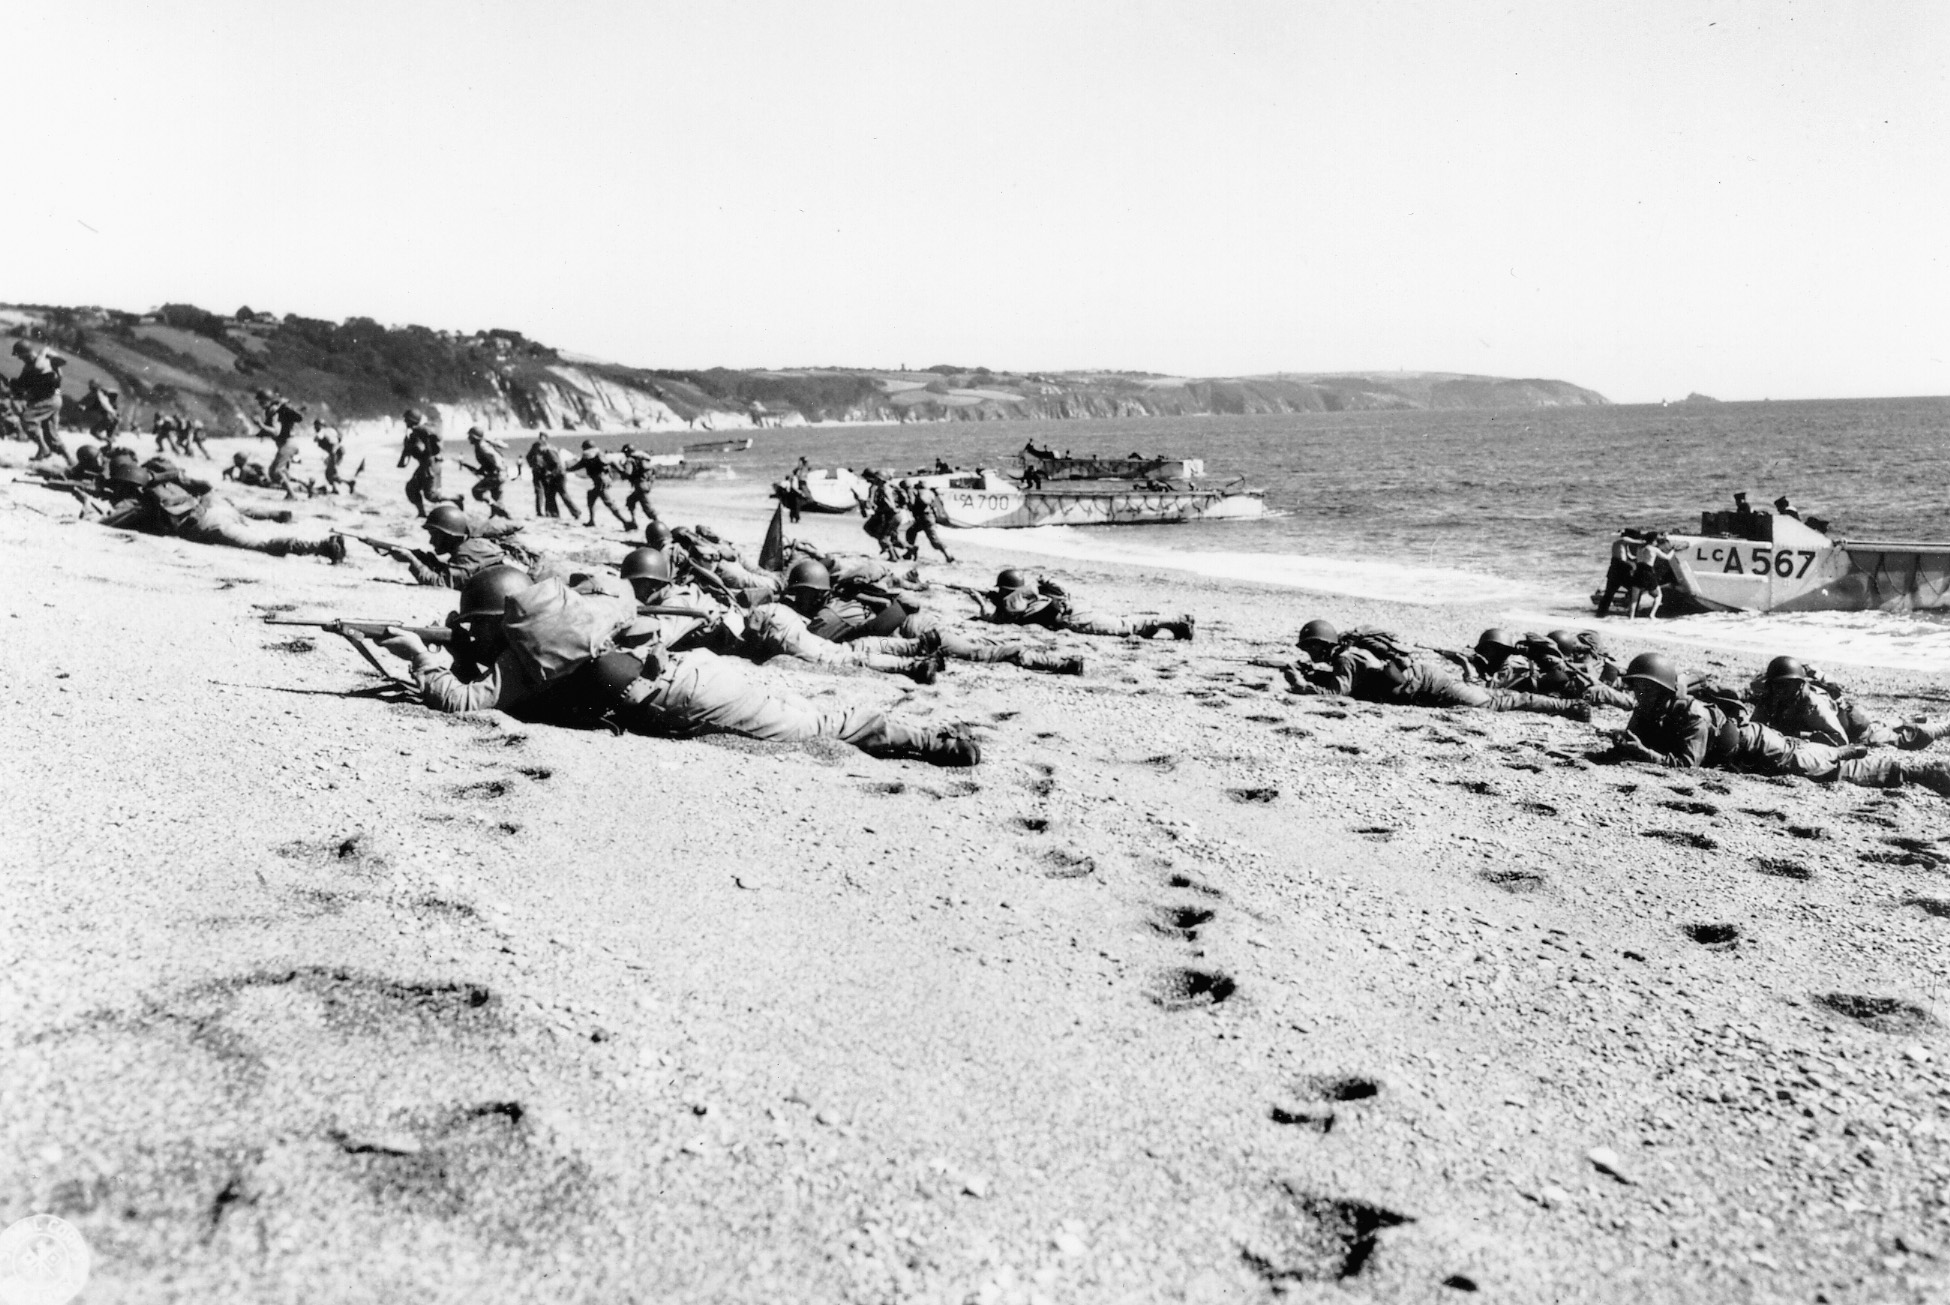 On a beach in England, British and American troops perform preparatory battle exercises.